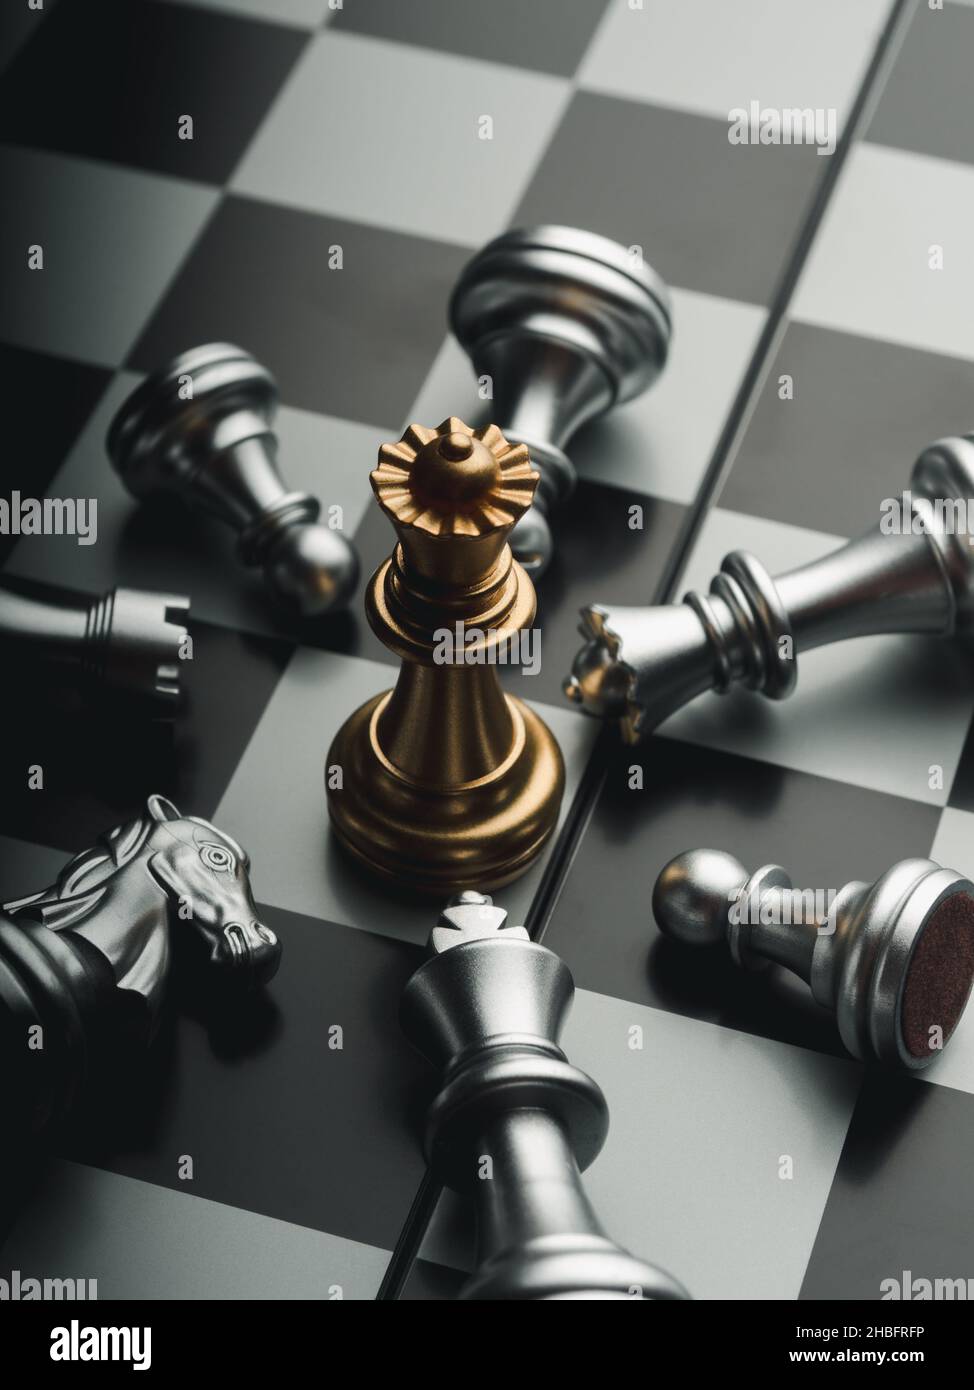 The golden queen chess piece standing with falling silver knight, rook, bishop, pawn pieces on chessboard on dark background, top view. Leadership, wi Stock Photo